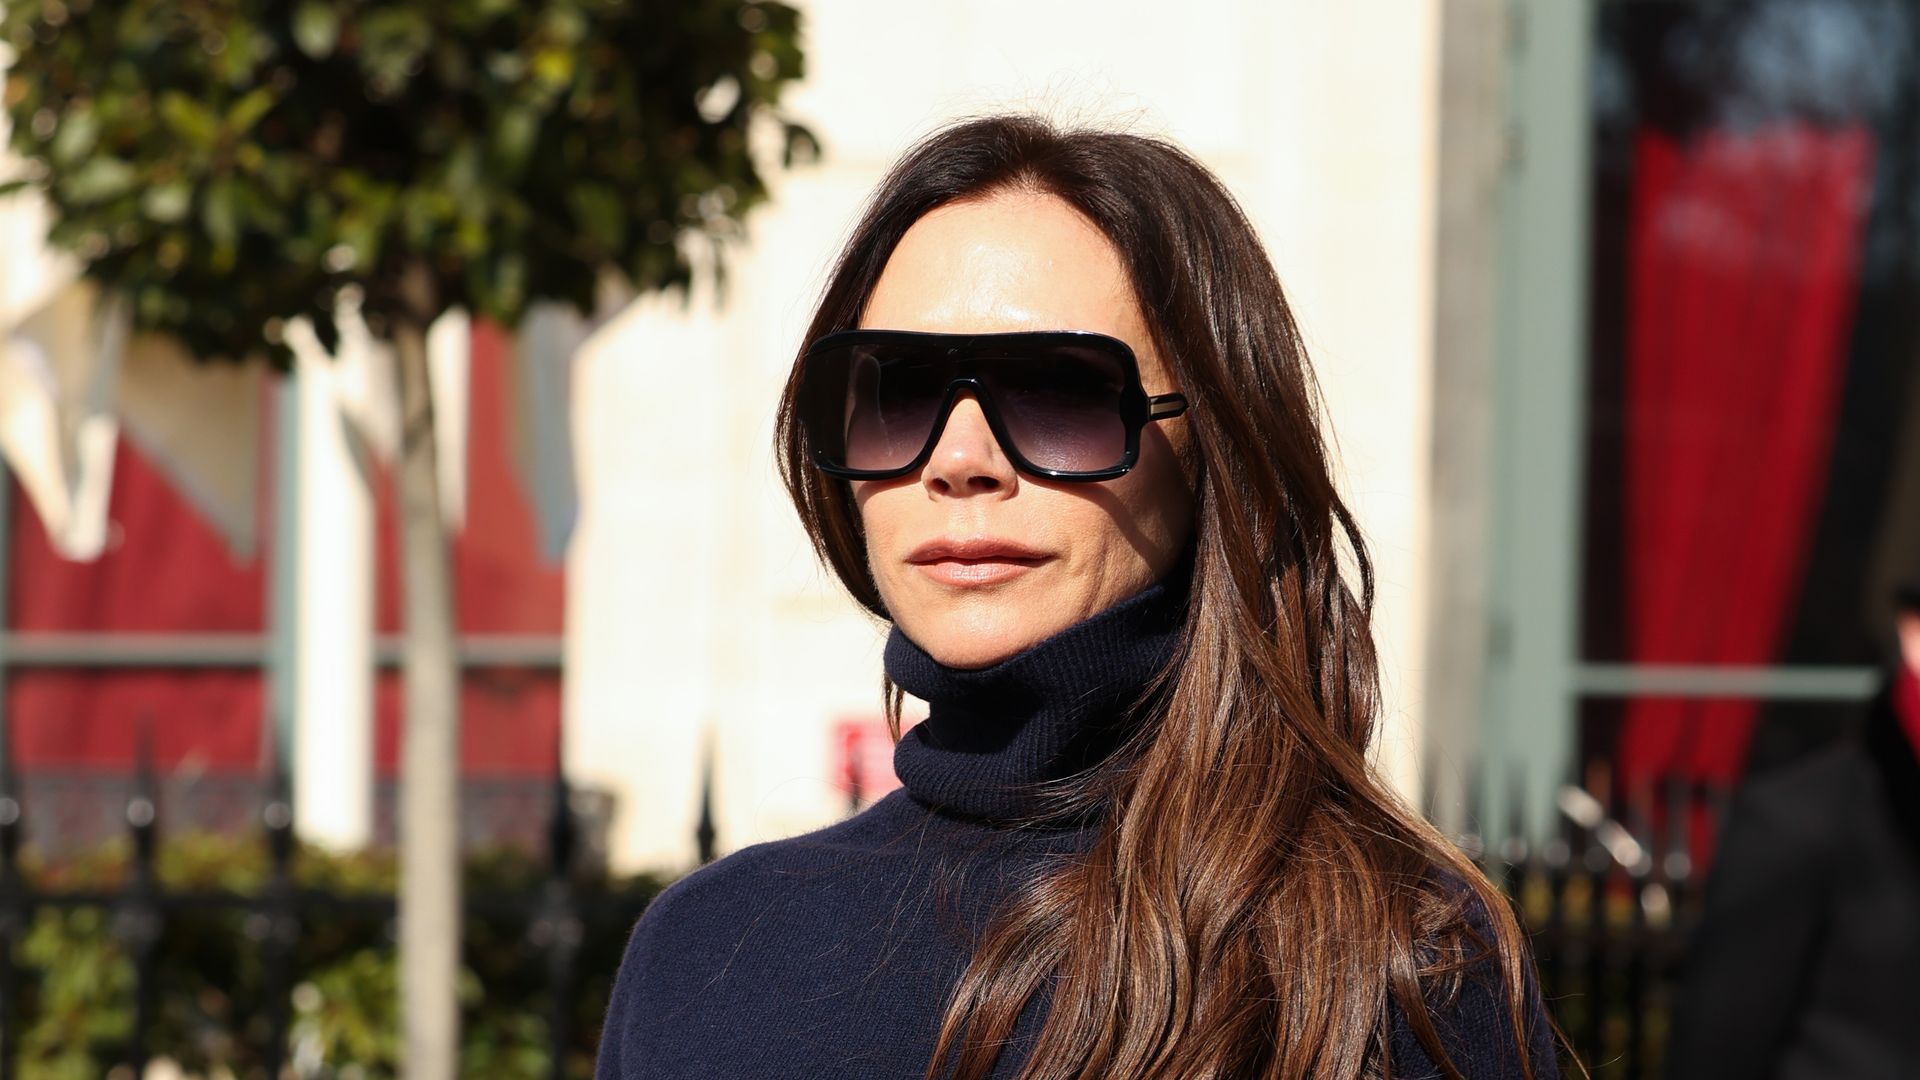 Victoria Beckham walks out in a sleek all-black outfit in Paris